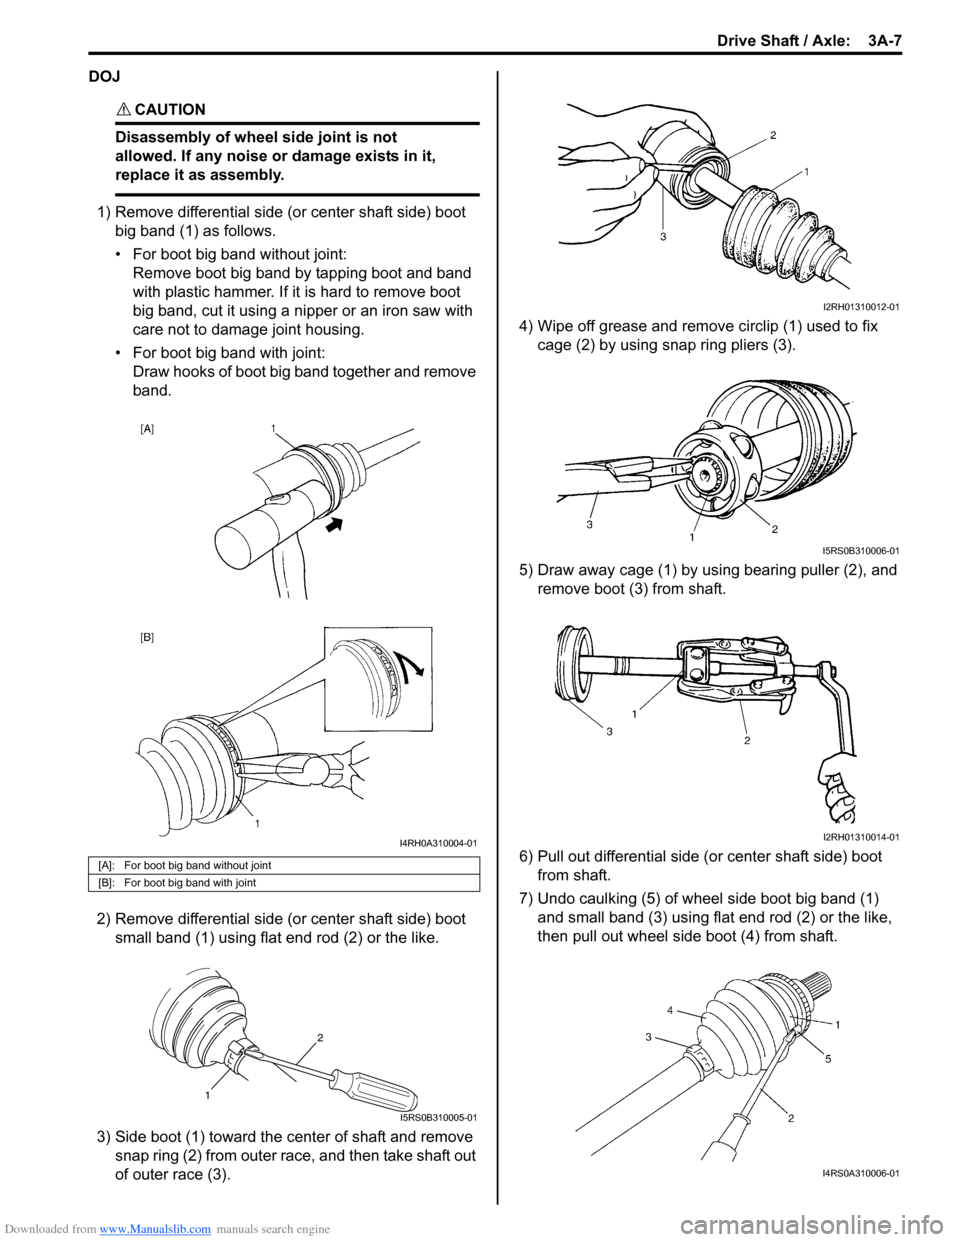 SUZUKI SWIFT 2008 2.G Service Workshop Manual Downloaded from www.Manualslib.com manuals search engine Drive Shaft / Axle:  3A-7
DOJ
CAUTION! 
Disassembly of wheel side joint is not 
allowed. If any noise or damage exists in it, 
replace it as as